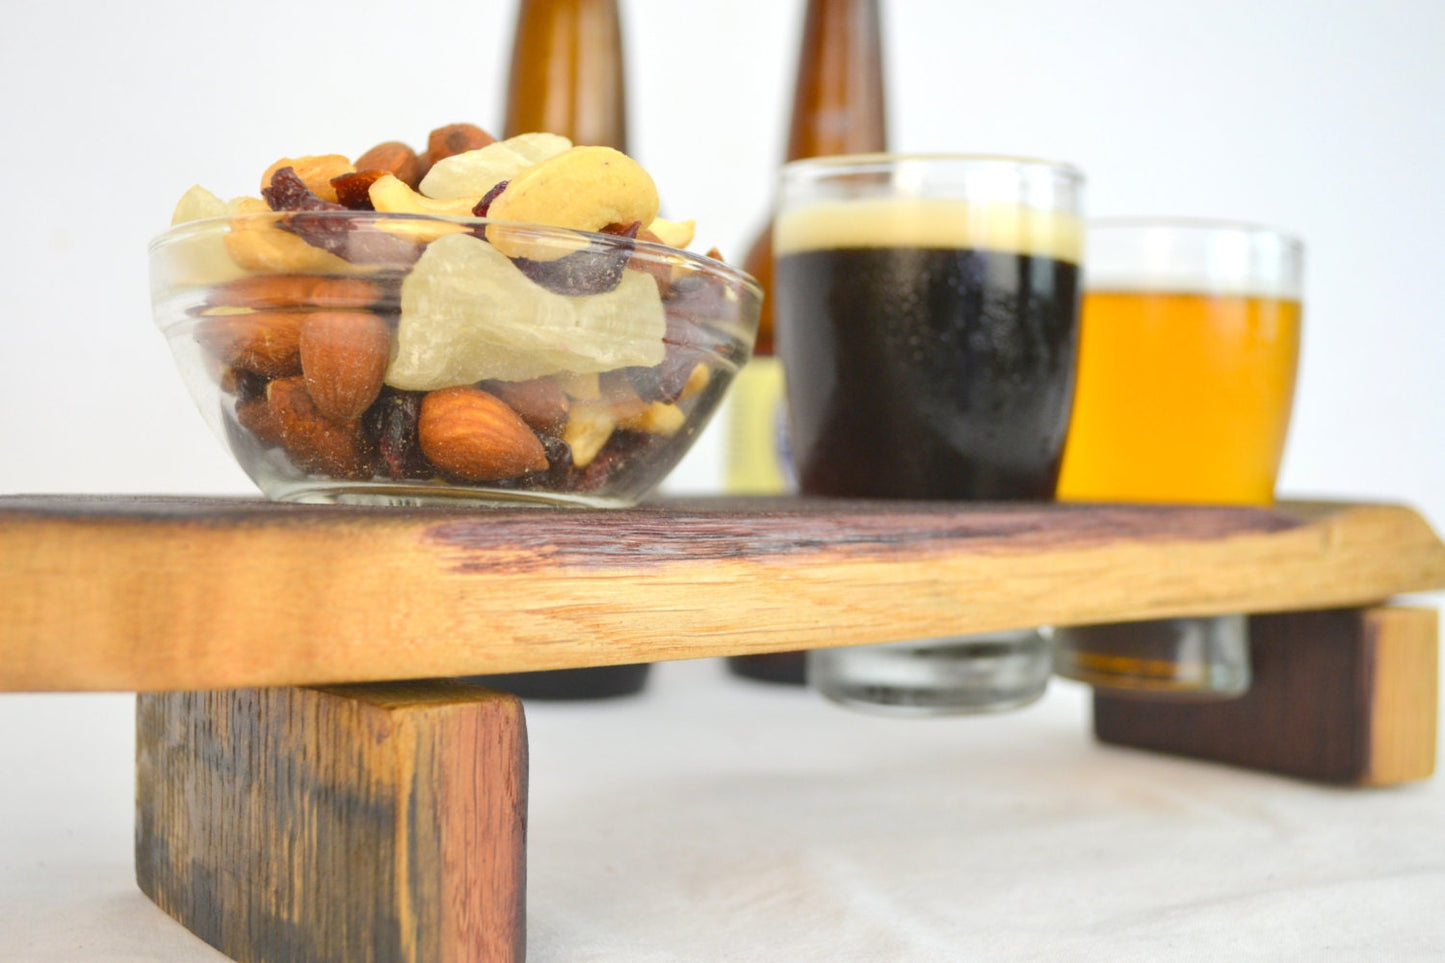 Barrel Stave Beer Flight with Snack Bowl and 2 Glasses - Domo - made from retired CA wine barrels 100% Recycled!